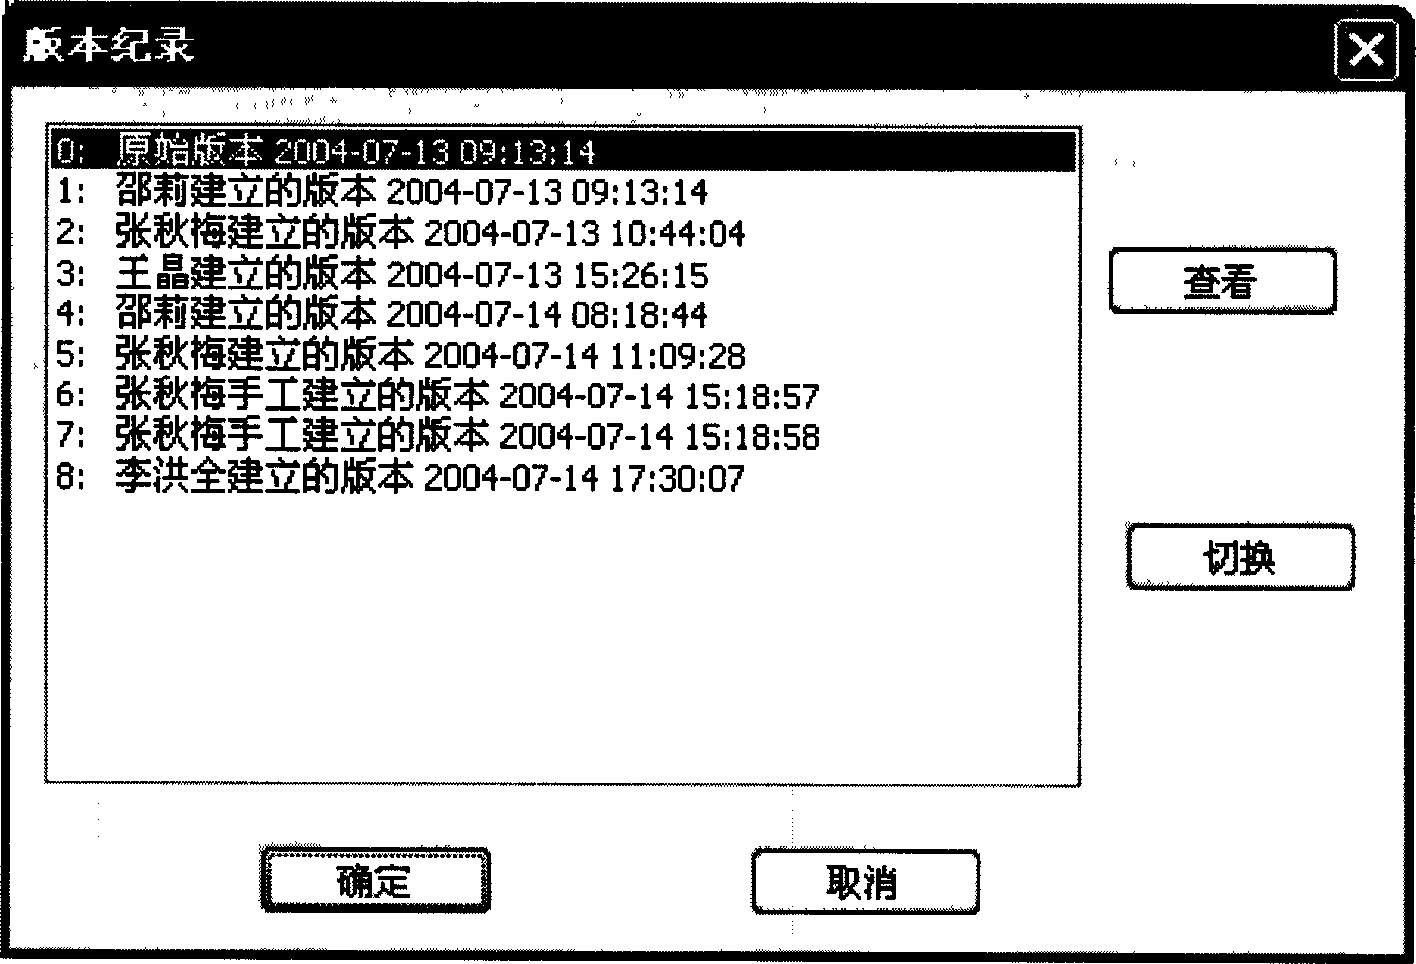 Recording method for extendable mark language file repairing trace